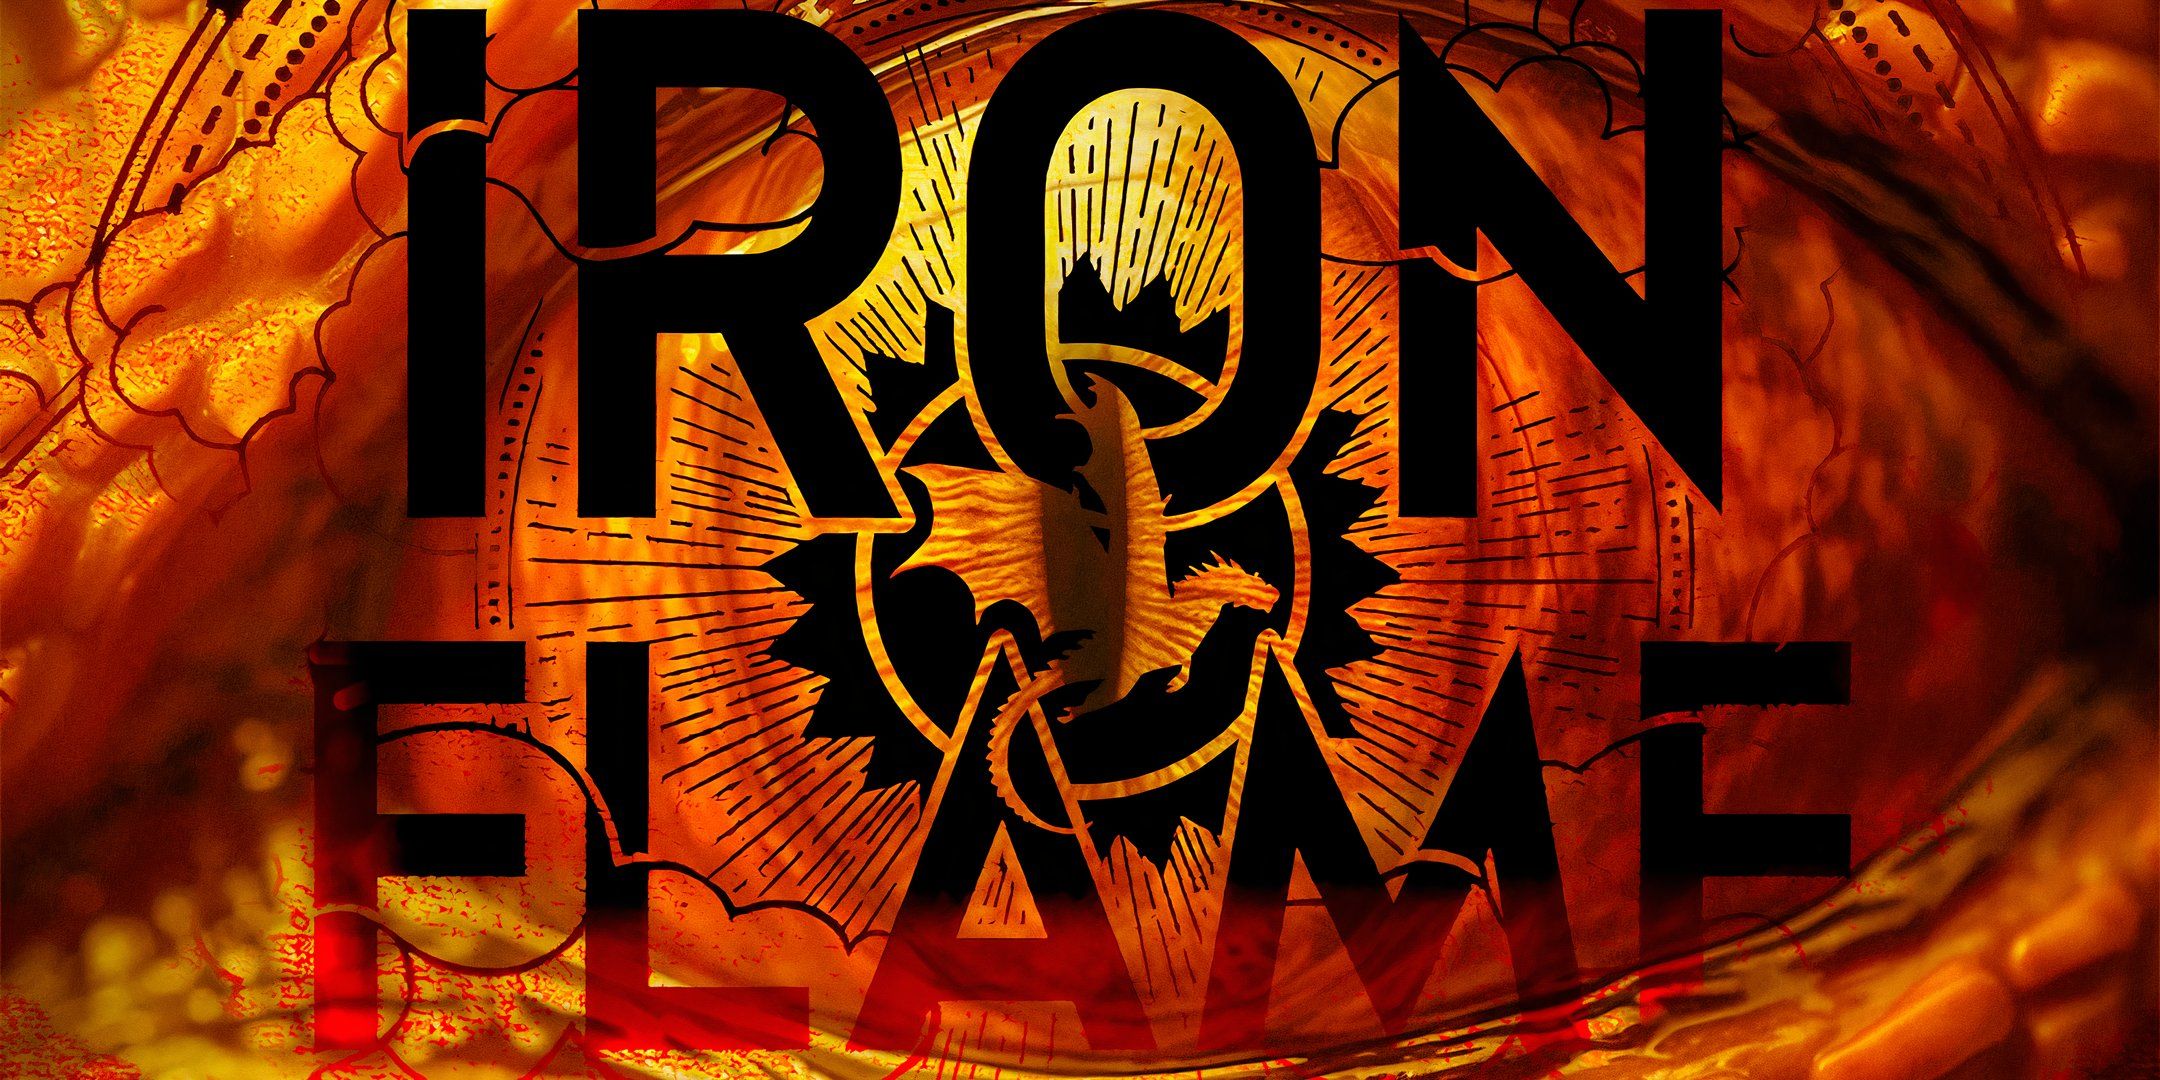 A cropped image of the Iron Flame book cover